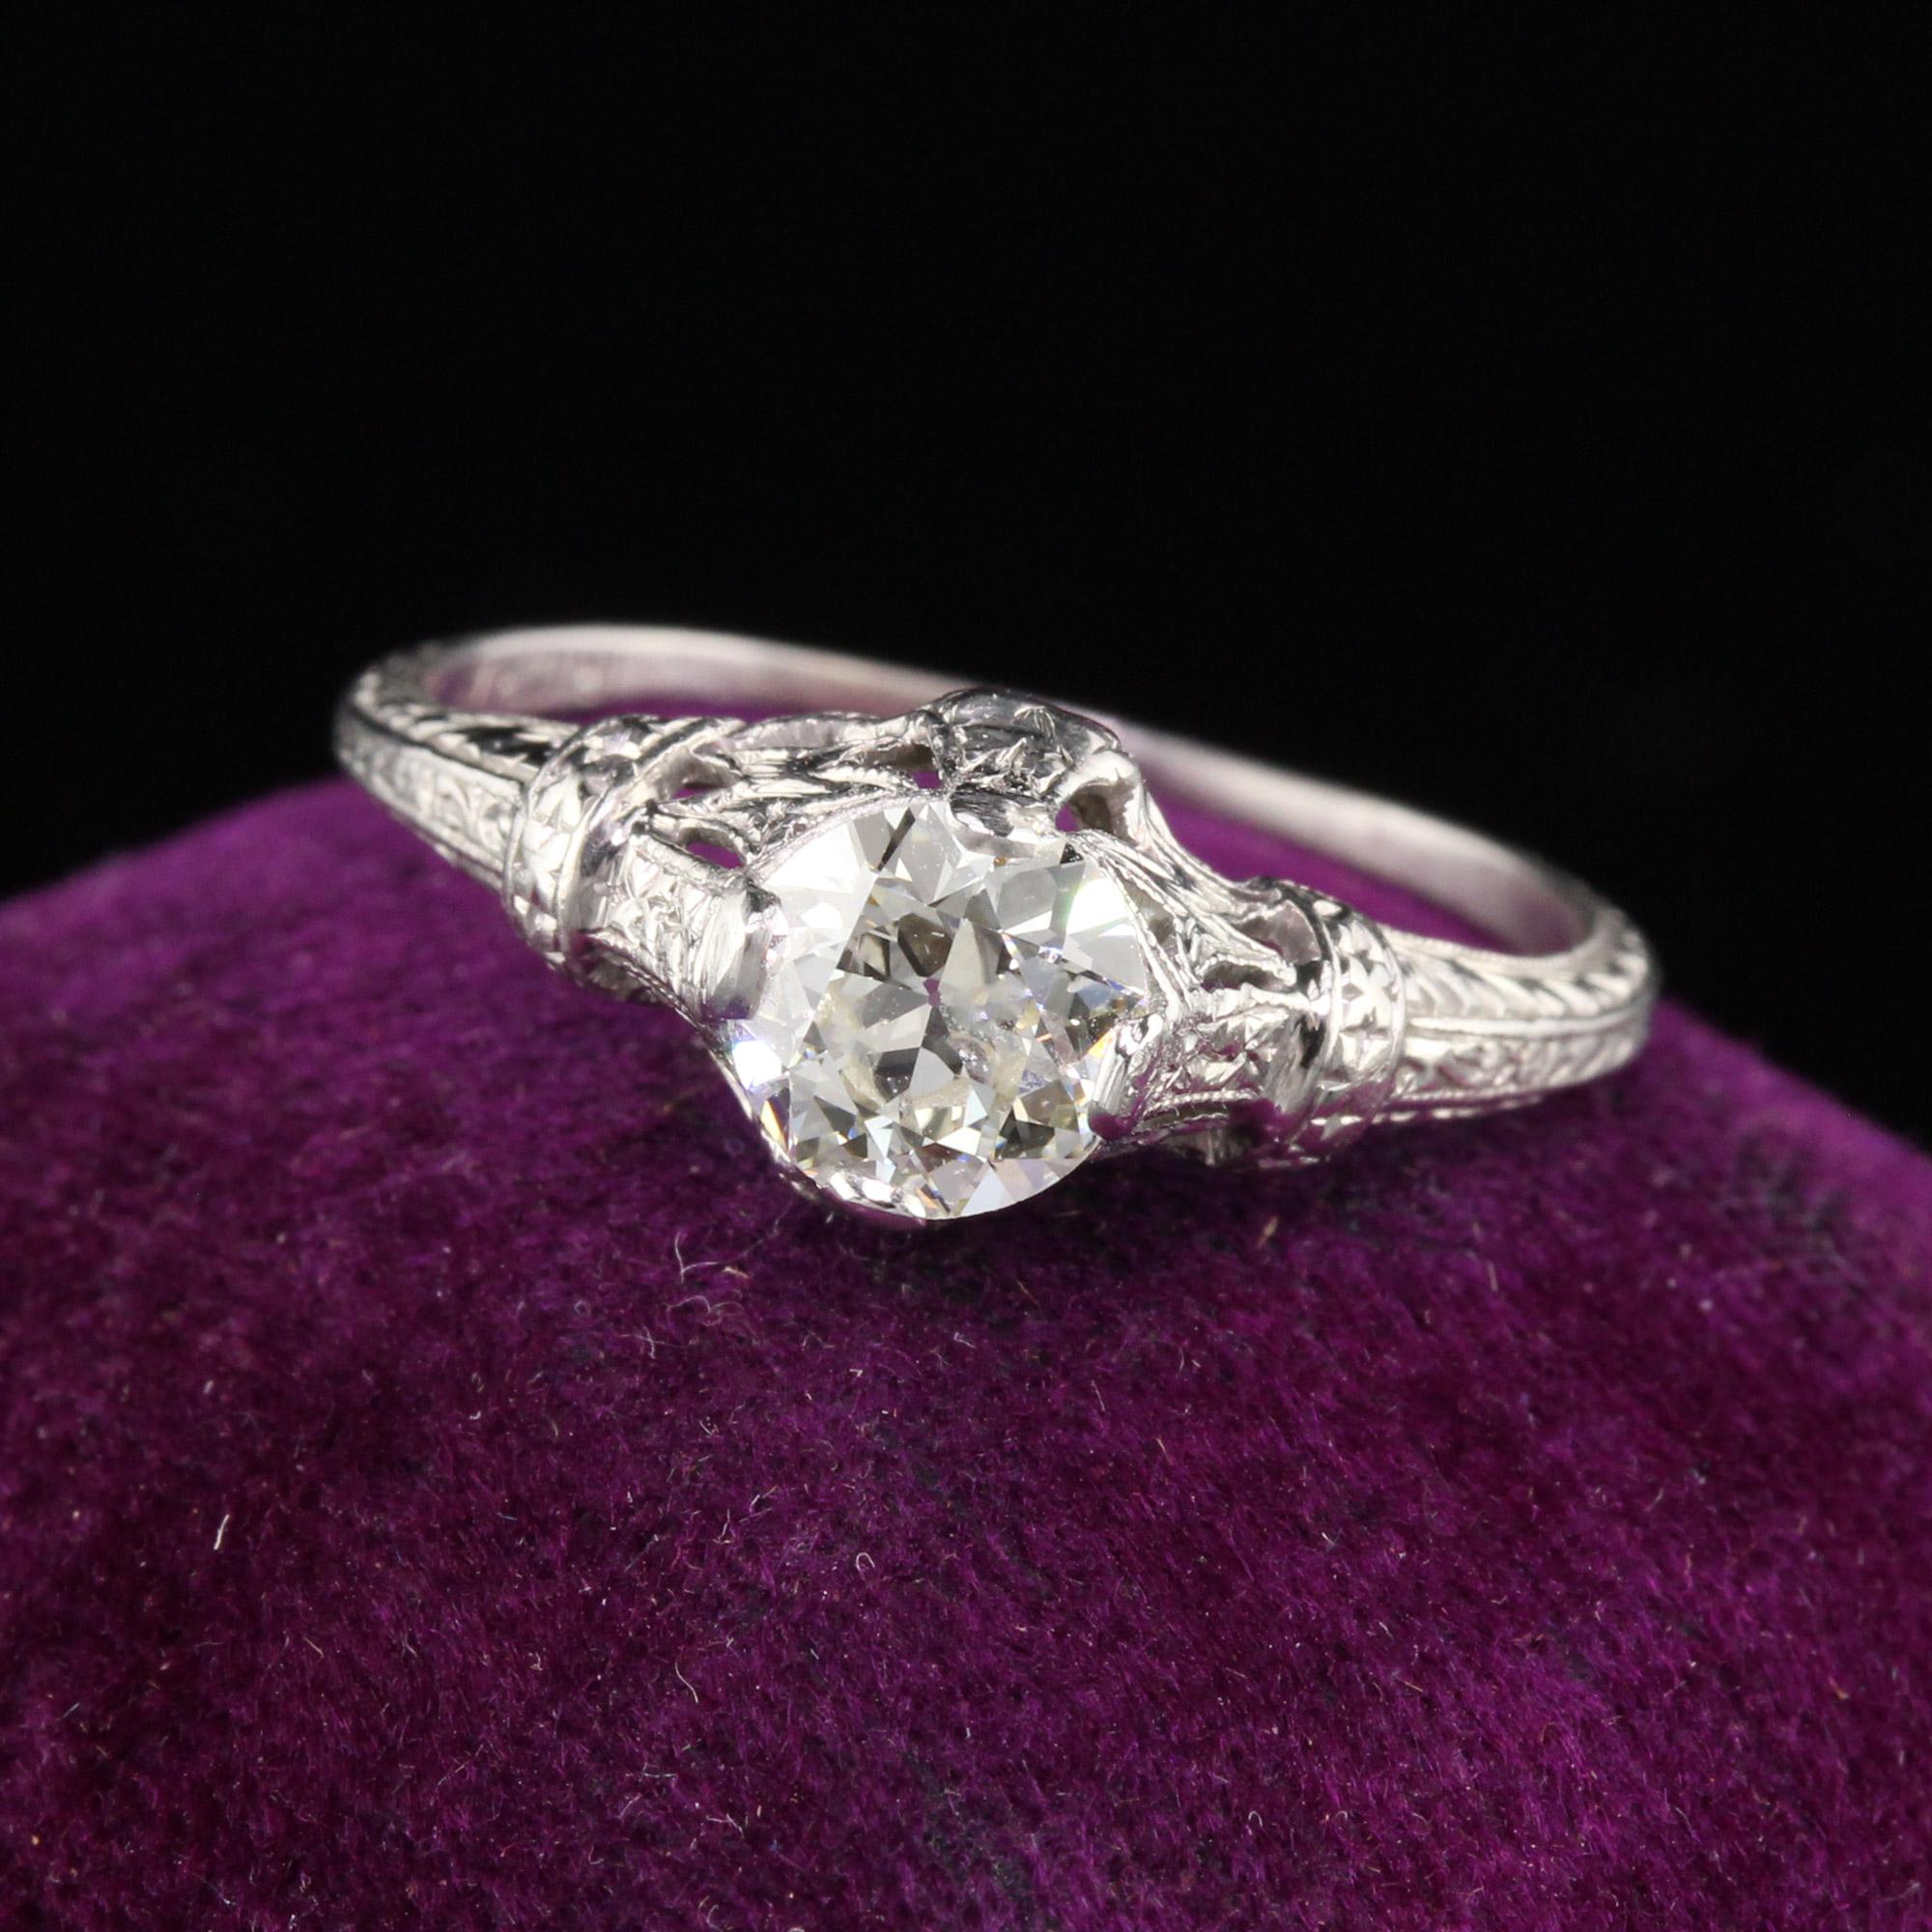 Gorgeous Art Deco Engagement Ring in platinum with an old european cut diamond in the center.

#R0183

Metal: Platinum

Weight: 2.6 Grams

Center Diamond Weight: Approximately 0.75 CTS

Center Diamond Color: K

Center Diamond Clarity: VS2

Ring